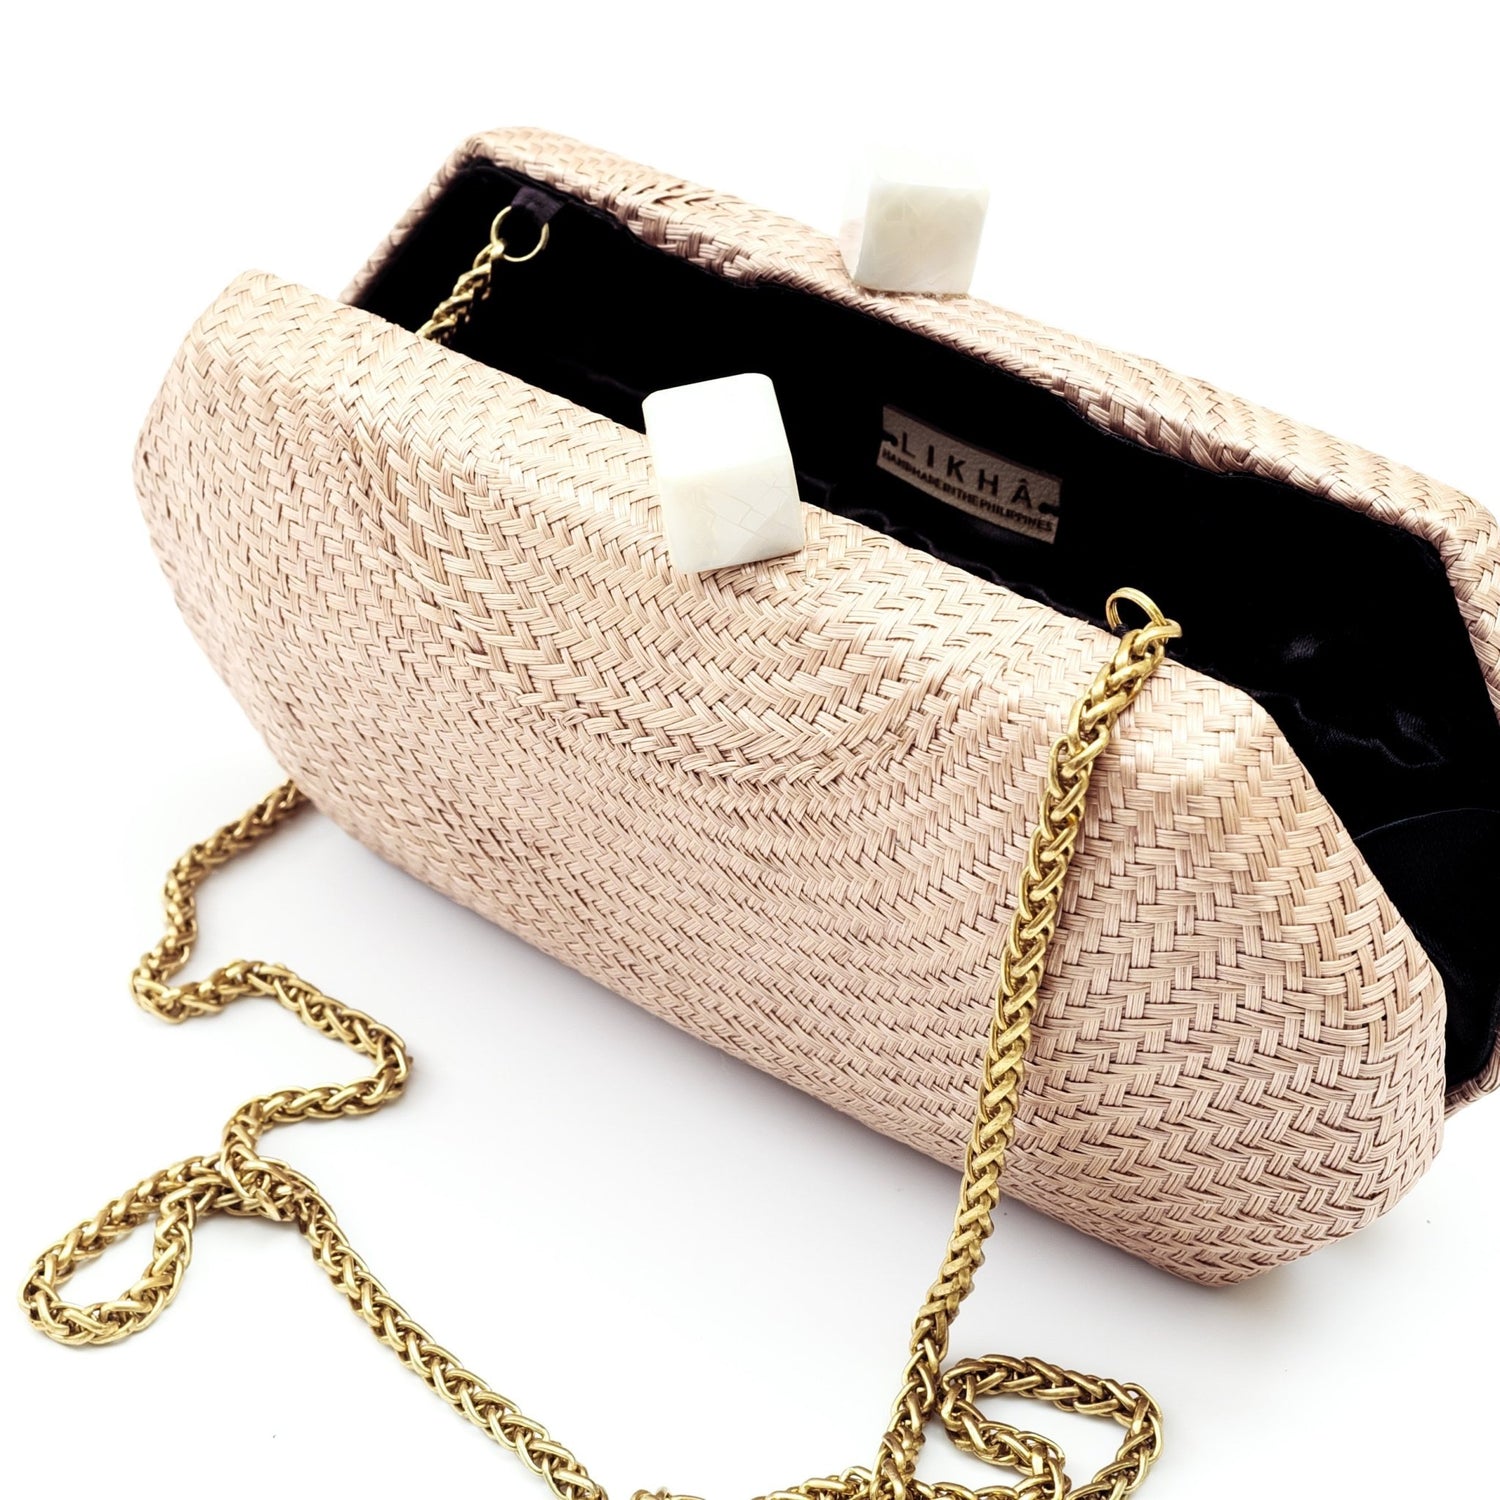 Clutches - Dusty Rose Clutch - Handcrafted Clutches | LIKHÂ - LIKHÂ